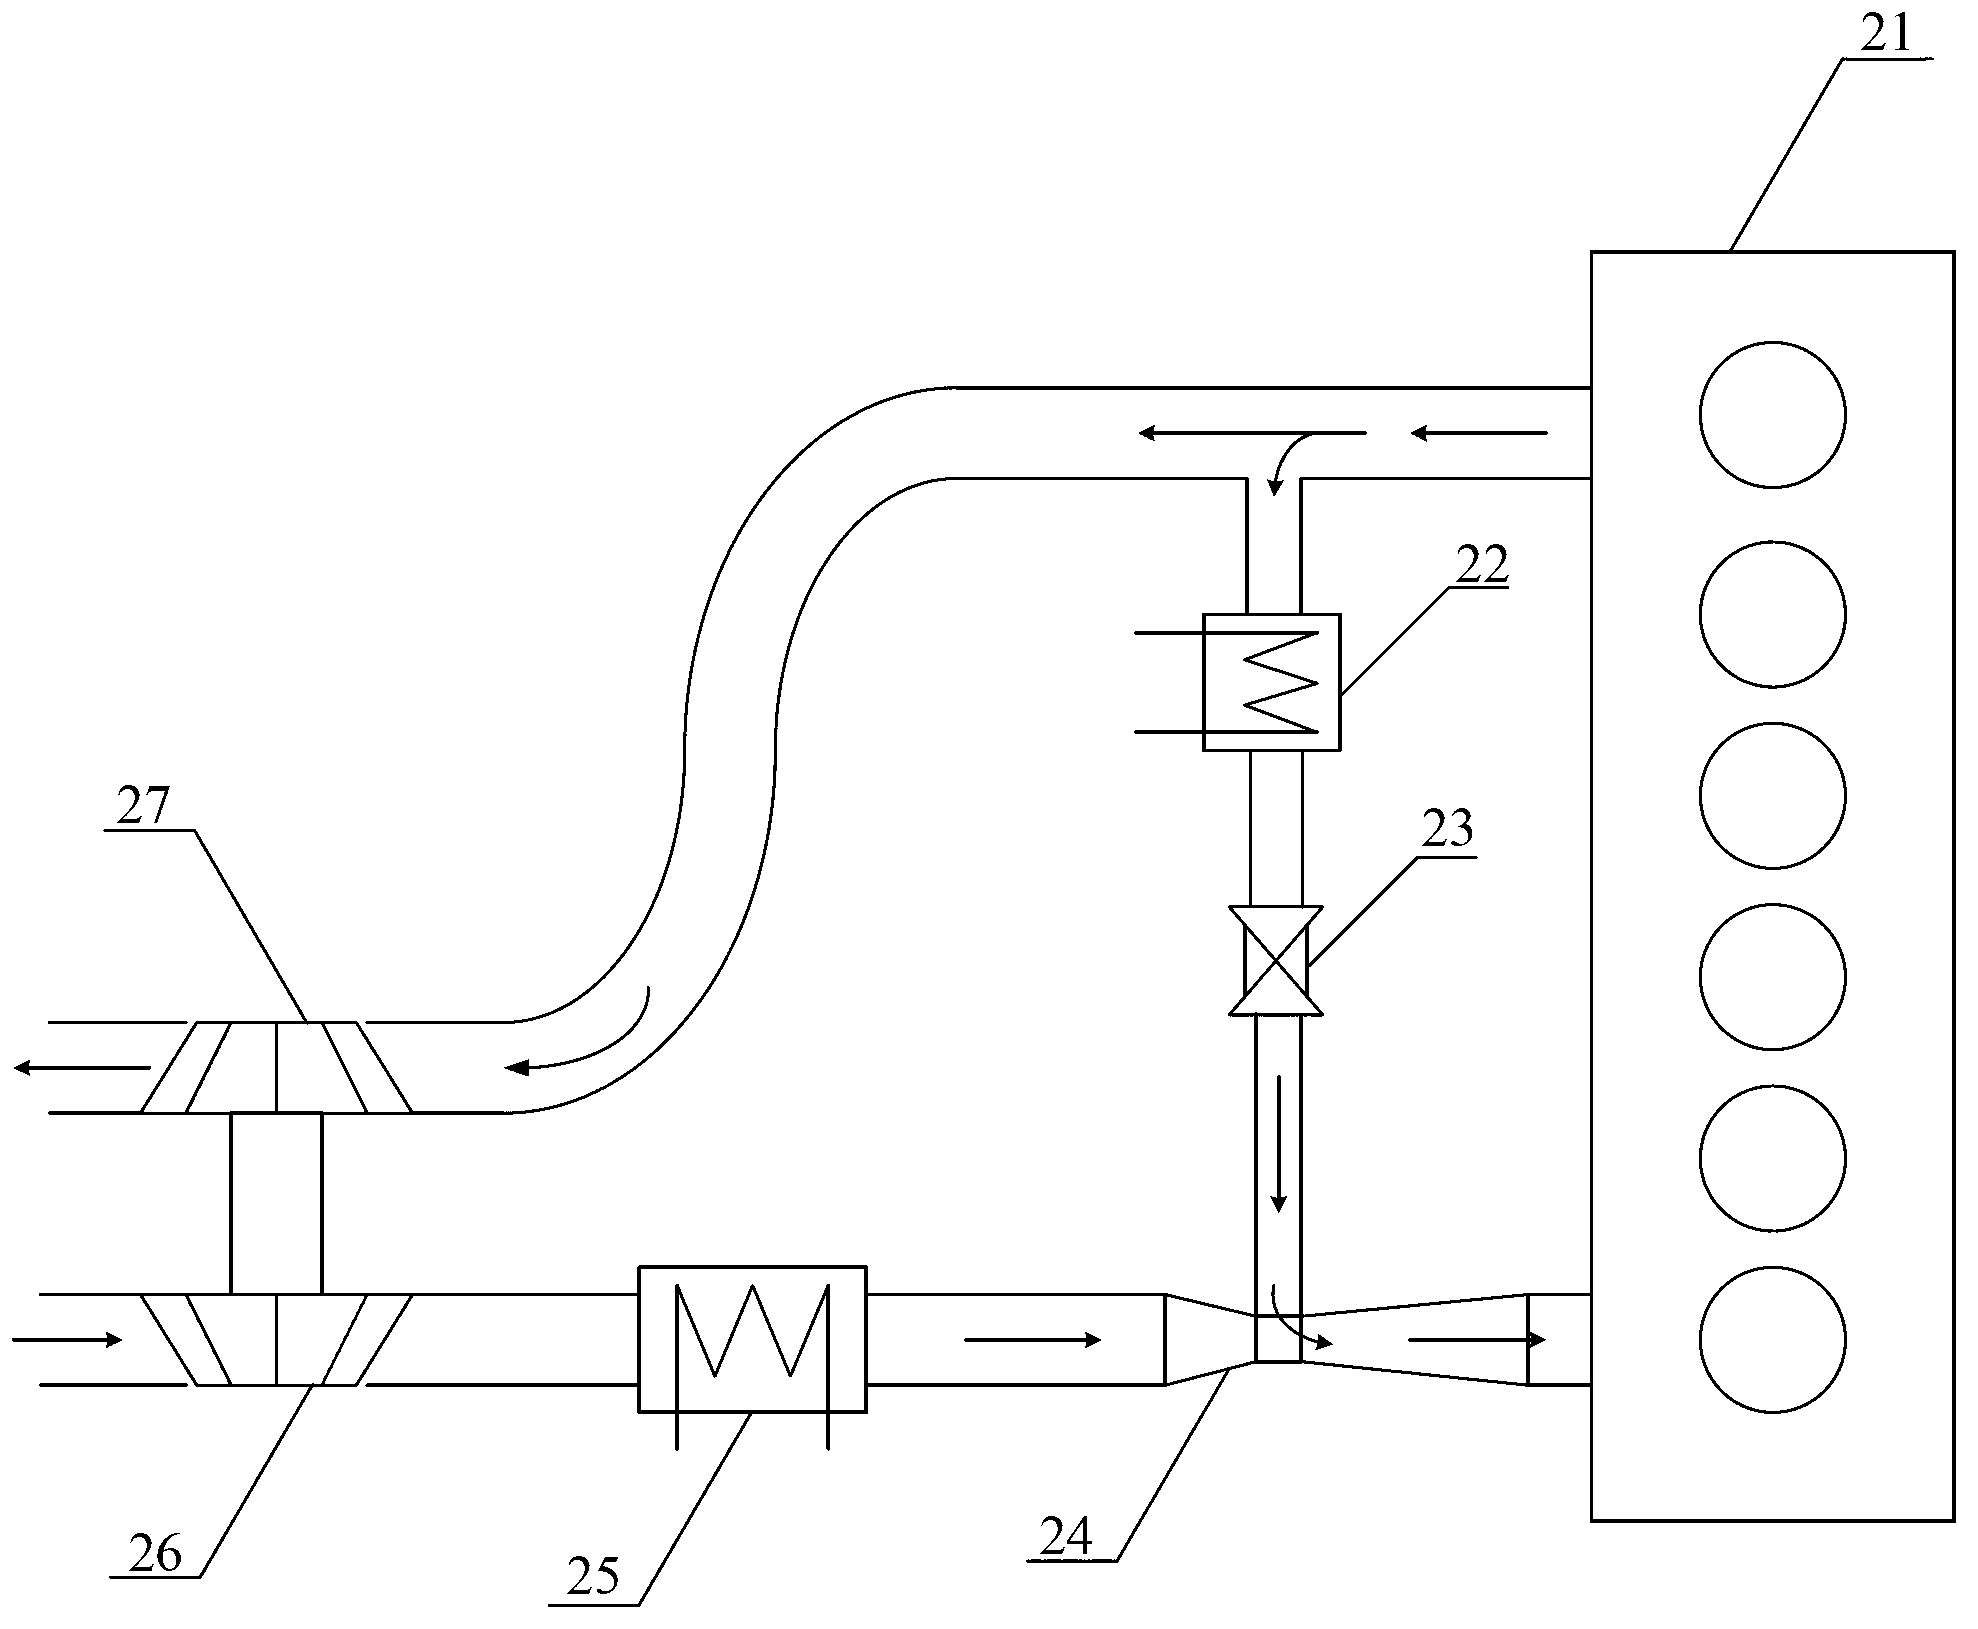 EGR (exhaust gas recirculation) air mixing device and fuel engine with EGR system